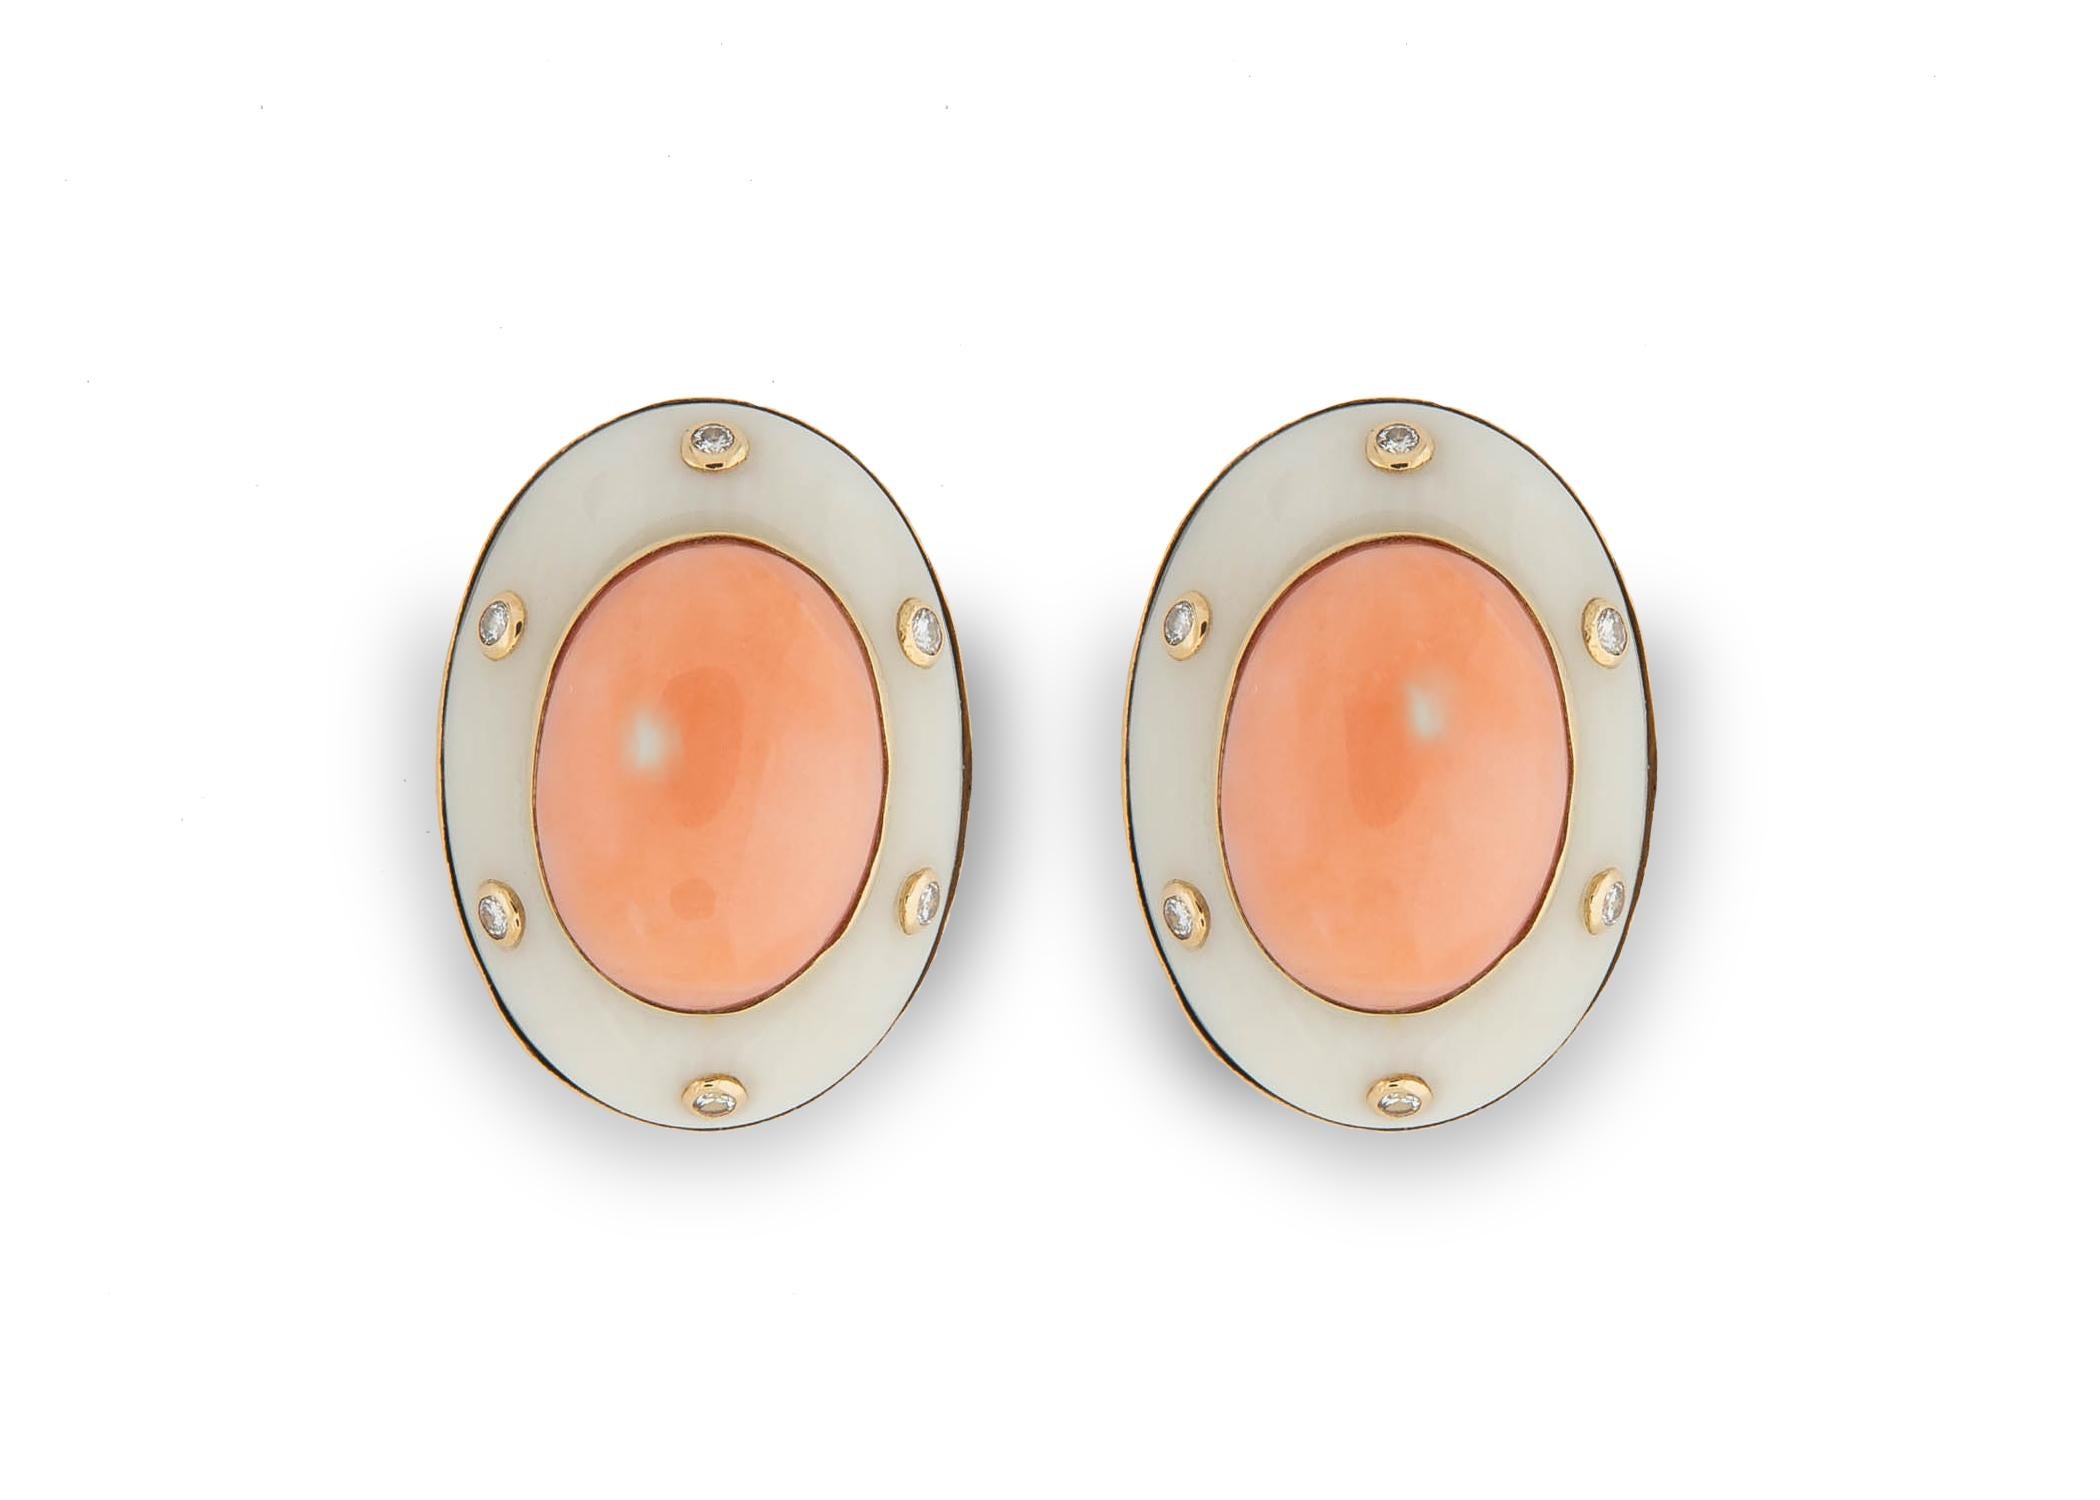 Trianon the sister company to Seaman Schepps frames beautiful pinkish orange coral with pure white coral and adds a touch of diamonds to create a chic wearable earring. 1 inch in size.